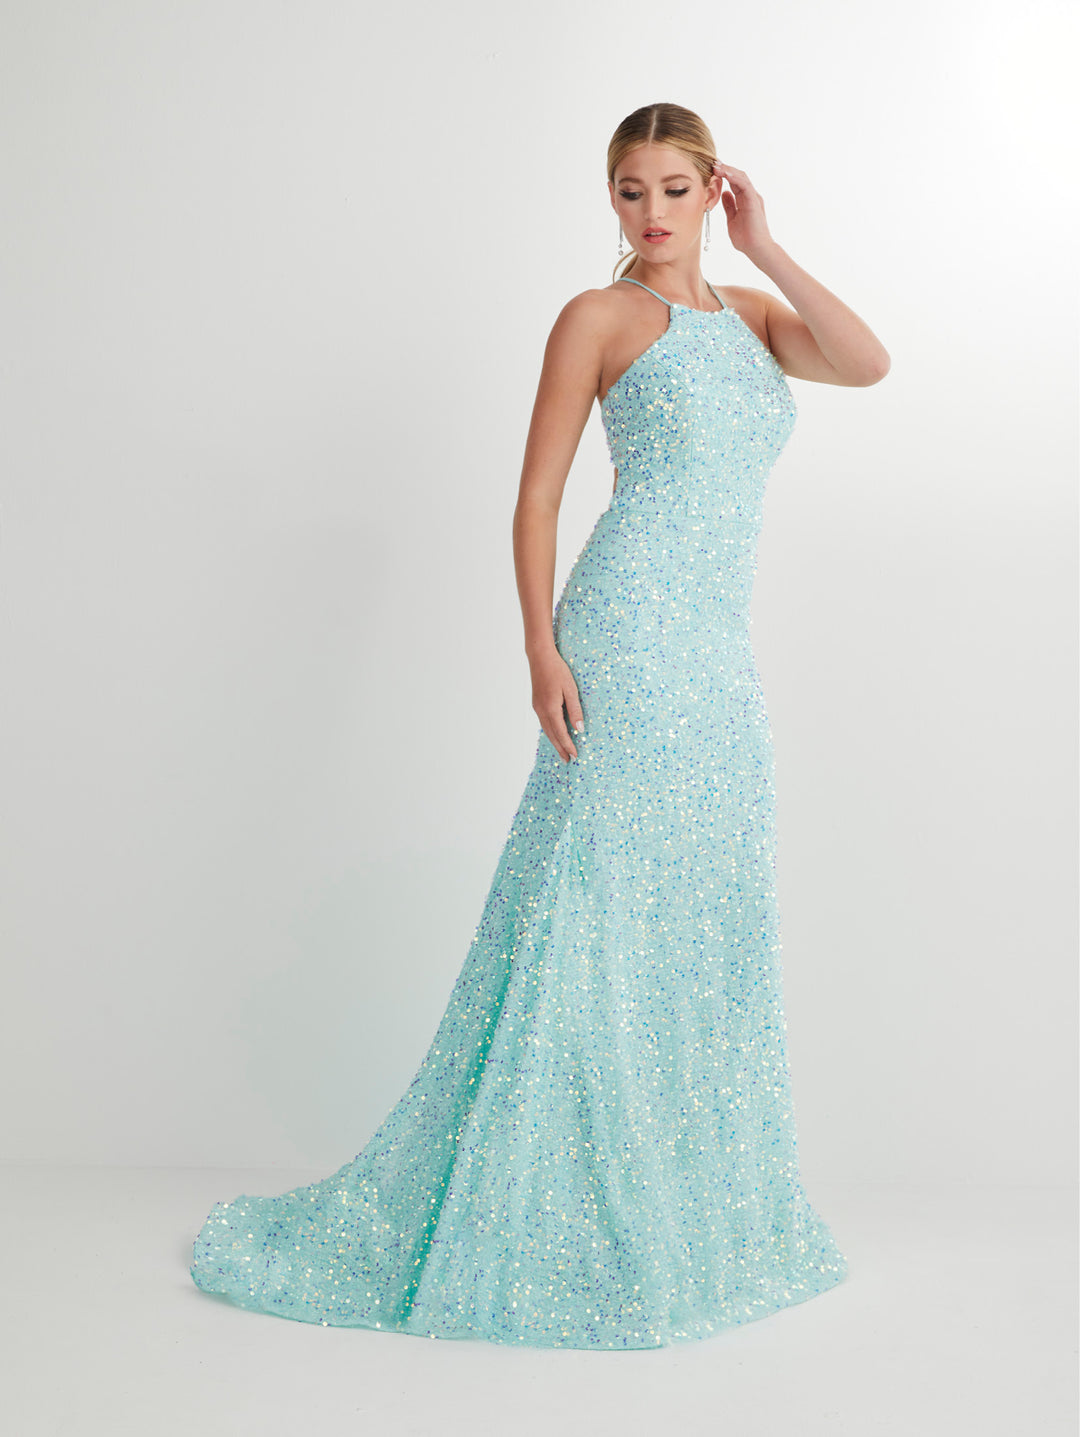 Fitted Sequin Sleeveless Halter Gown by Studio 17 12846